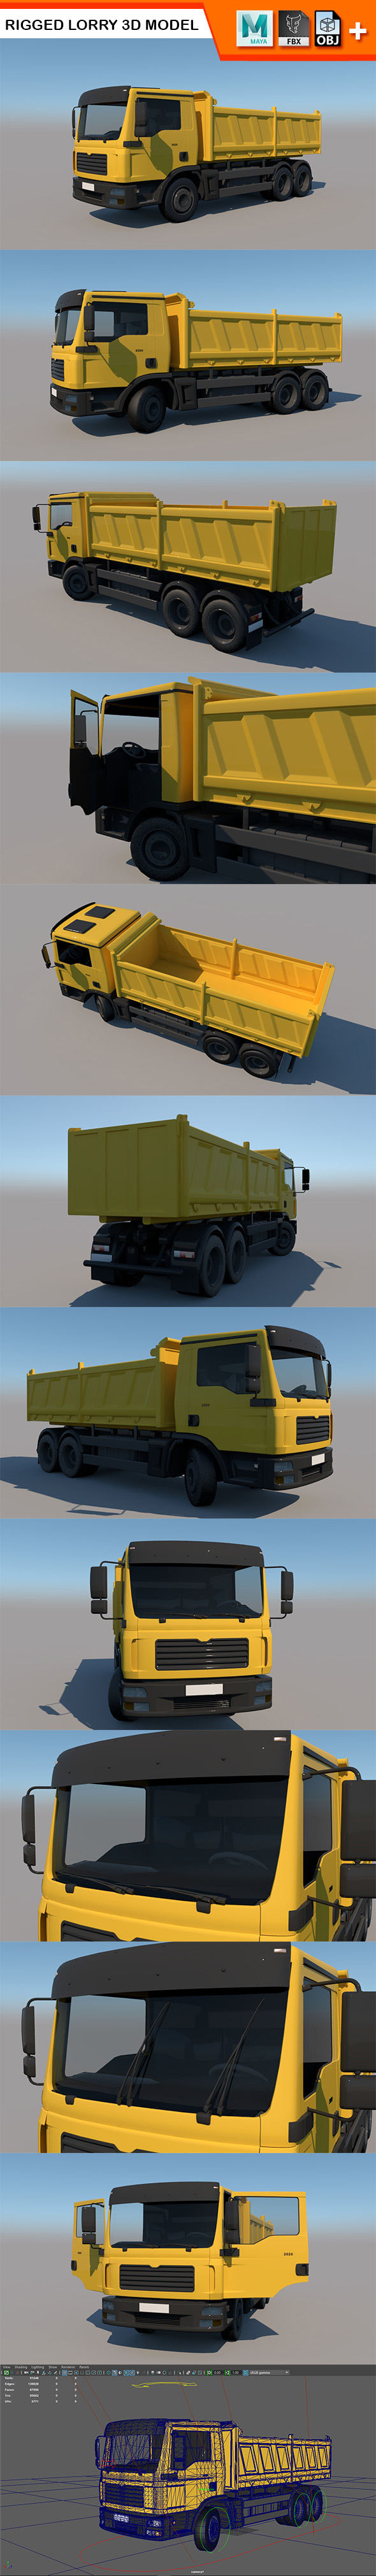 Rigged Lorry Model - 3Docean 28358358